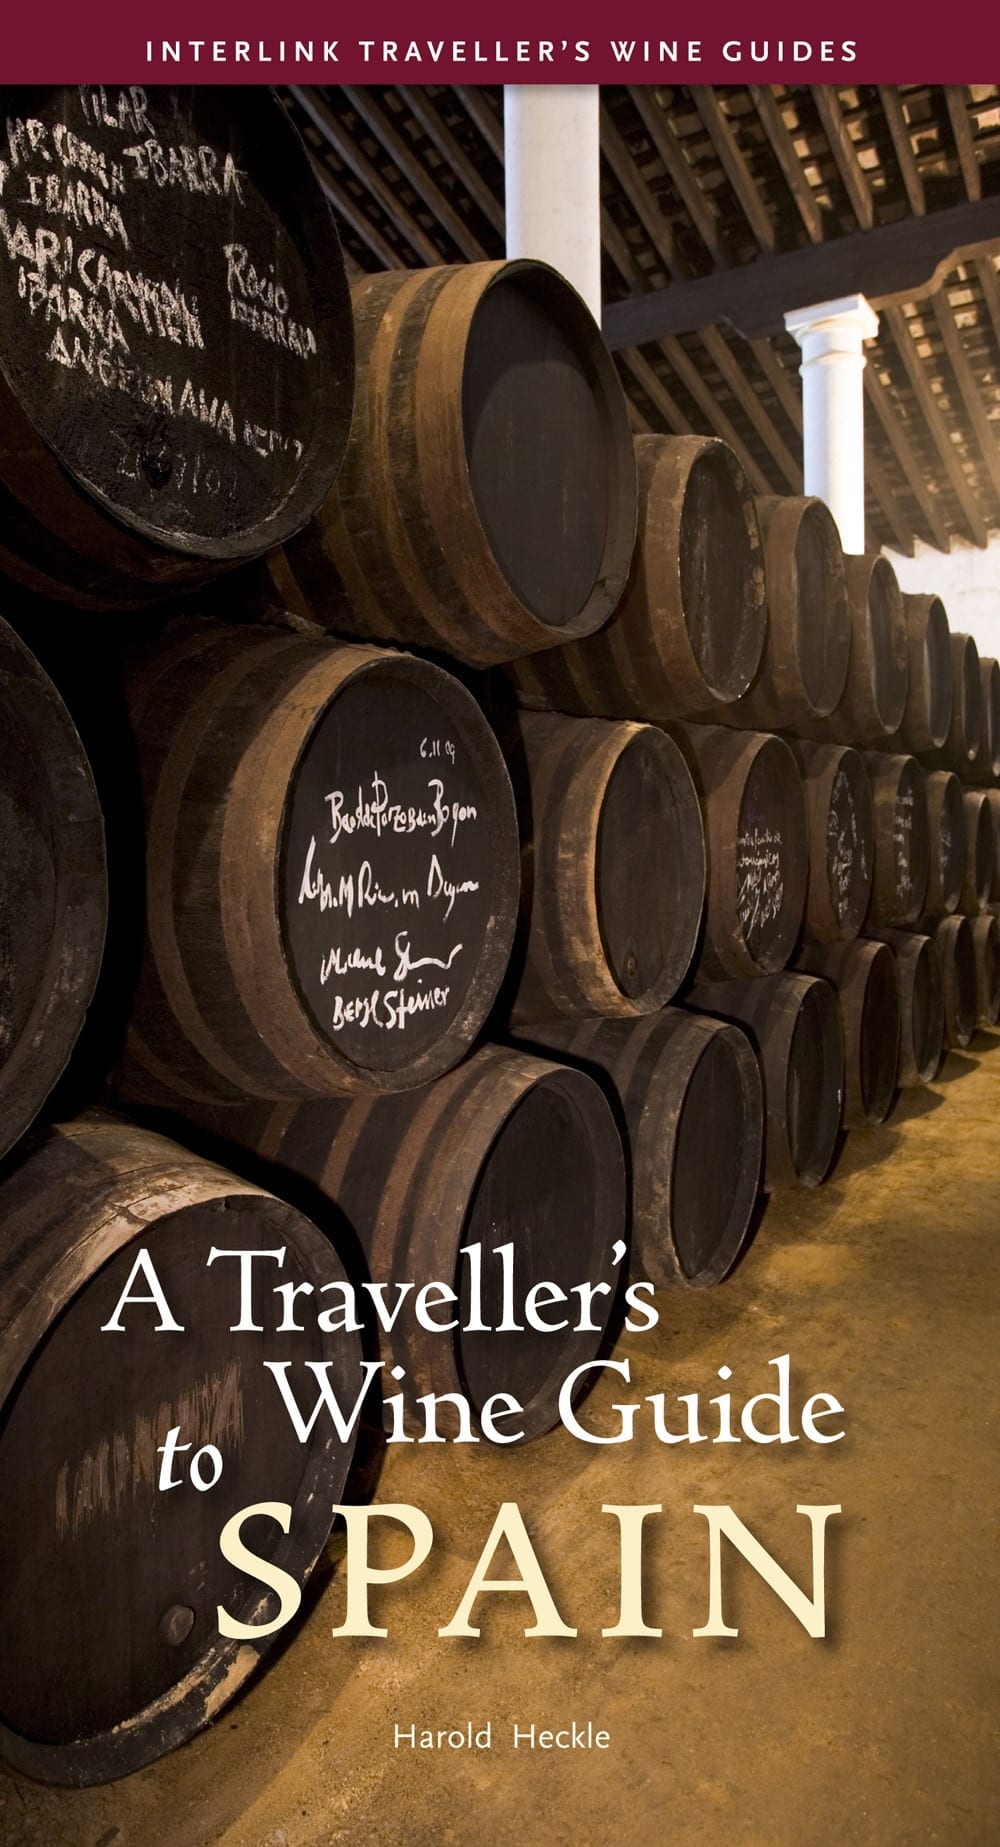 A Traveller’s Wine Guide to Spain